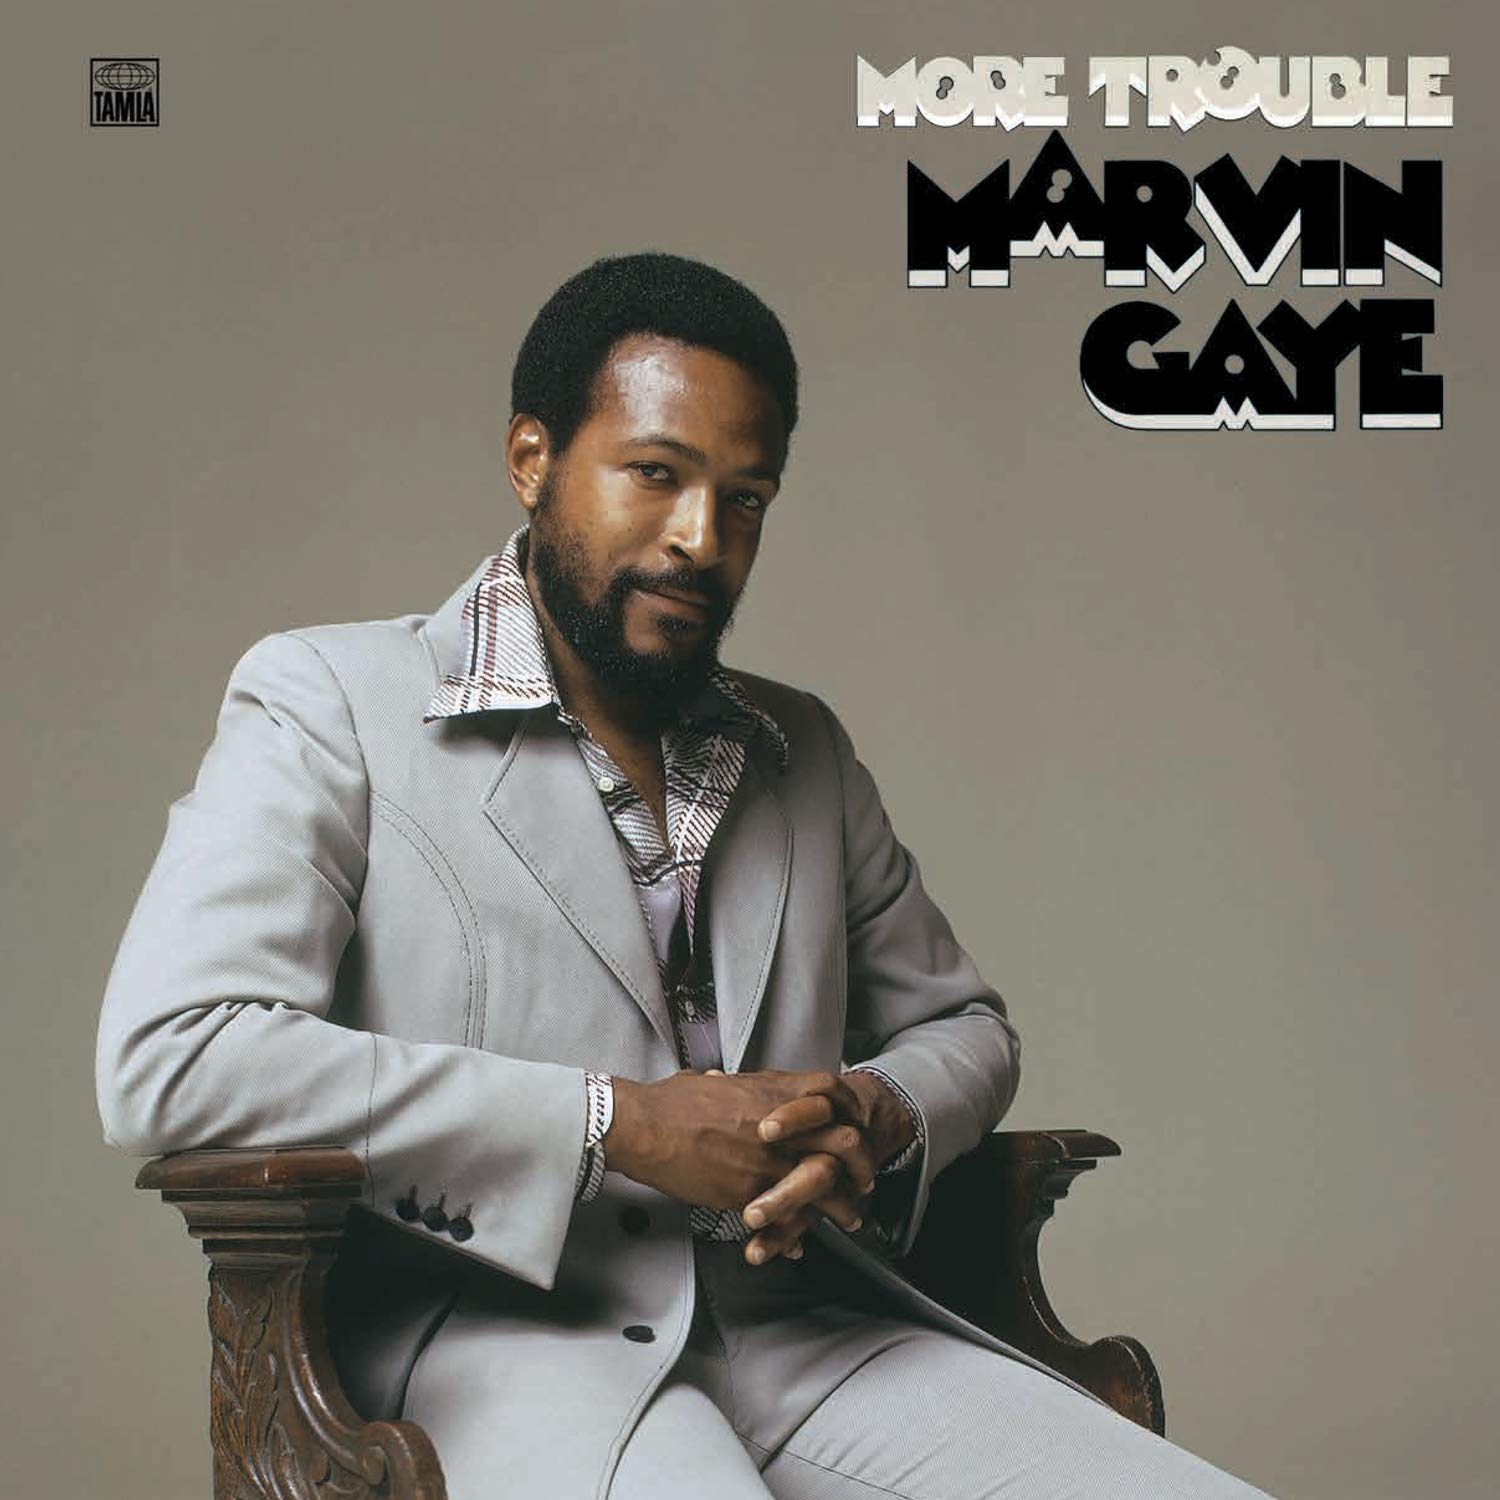 More Trouble by Marvin Gaye